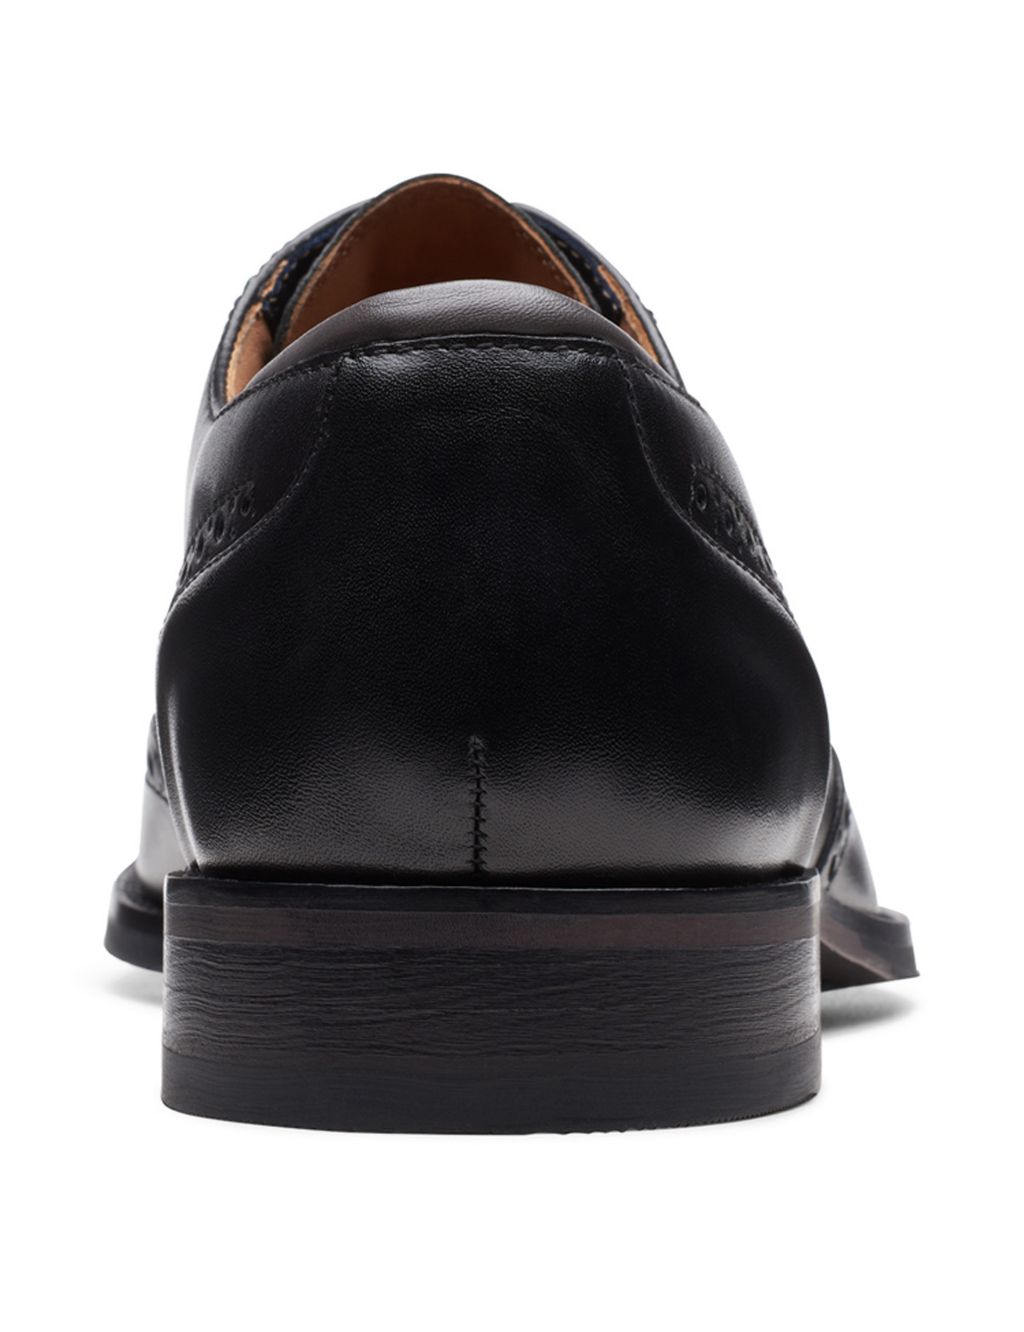 Leather Brogues image 7